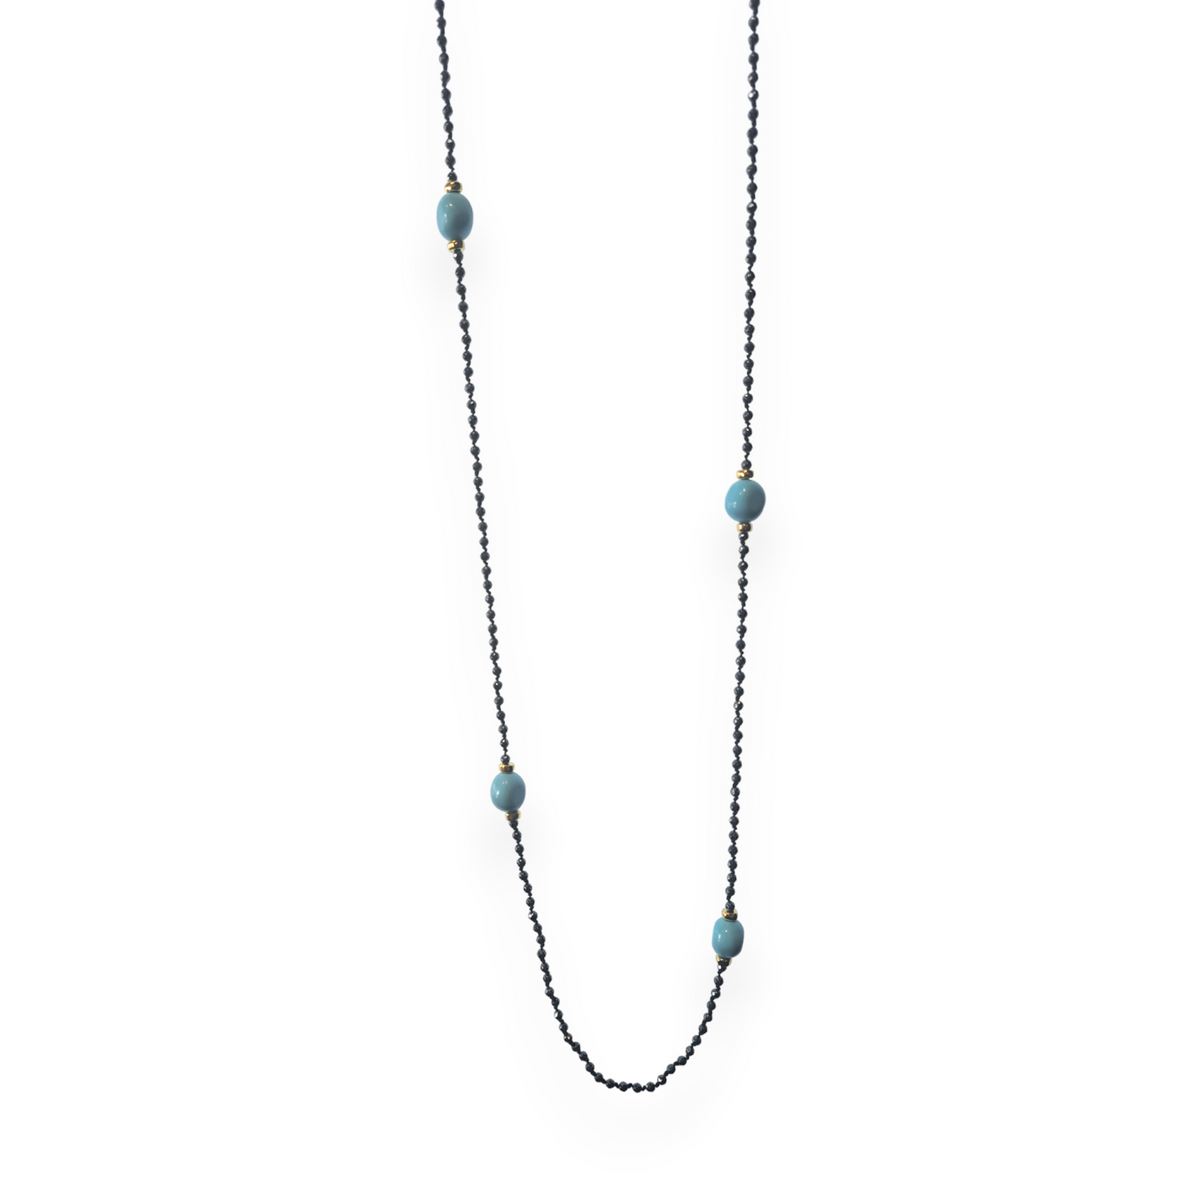 Vernus | Ariana Necklace | Turquoise &amp; Hematite | Gold Plated Stainless Steel